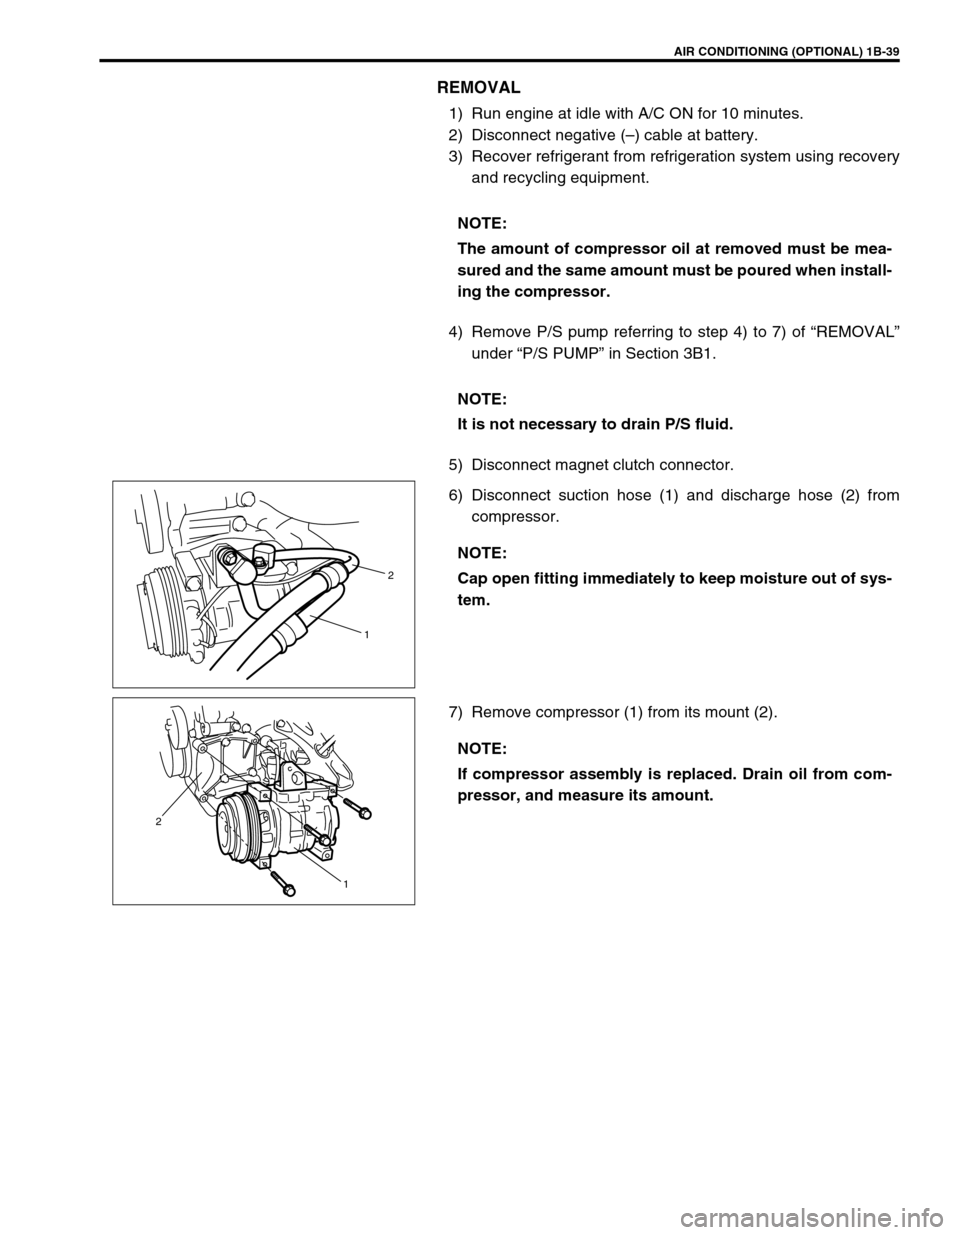 SUZUKI GRAND VITARA 2001 2.G User Guide AIR CONDITIONING (OPTIONAL) 1B-39
REMOVAL
1) Run engine at idle with A/C ON for 10 minutes.
2) Disconnect negative (–) cable at battery.
3) Recover refrigerant from refrigeration system using recove